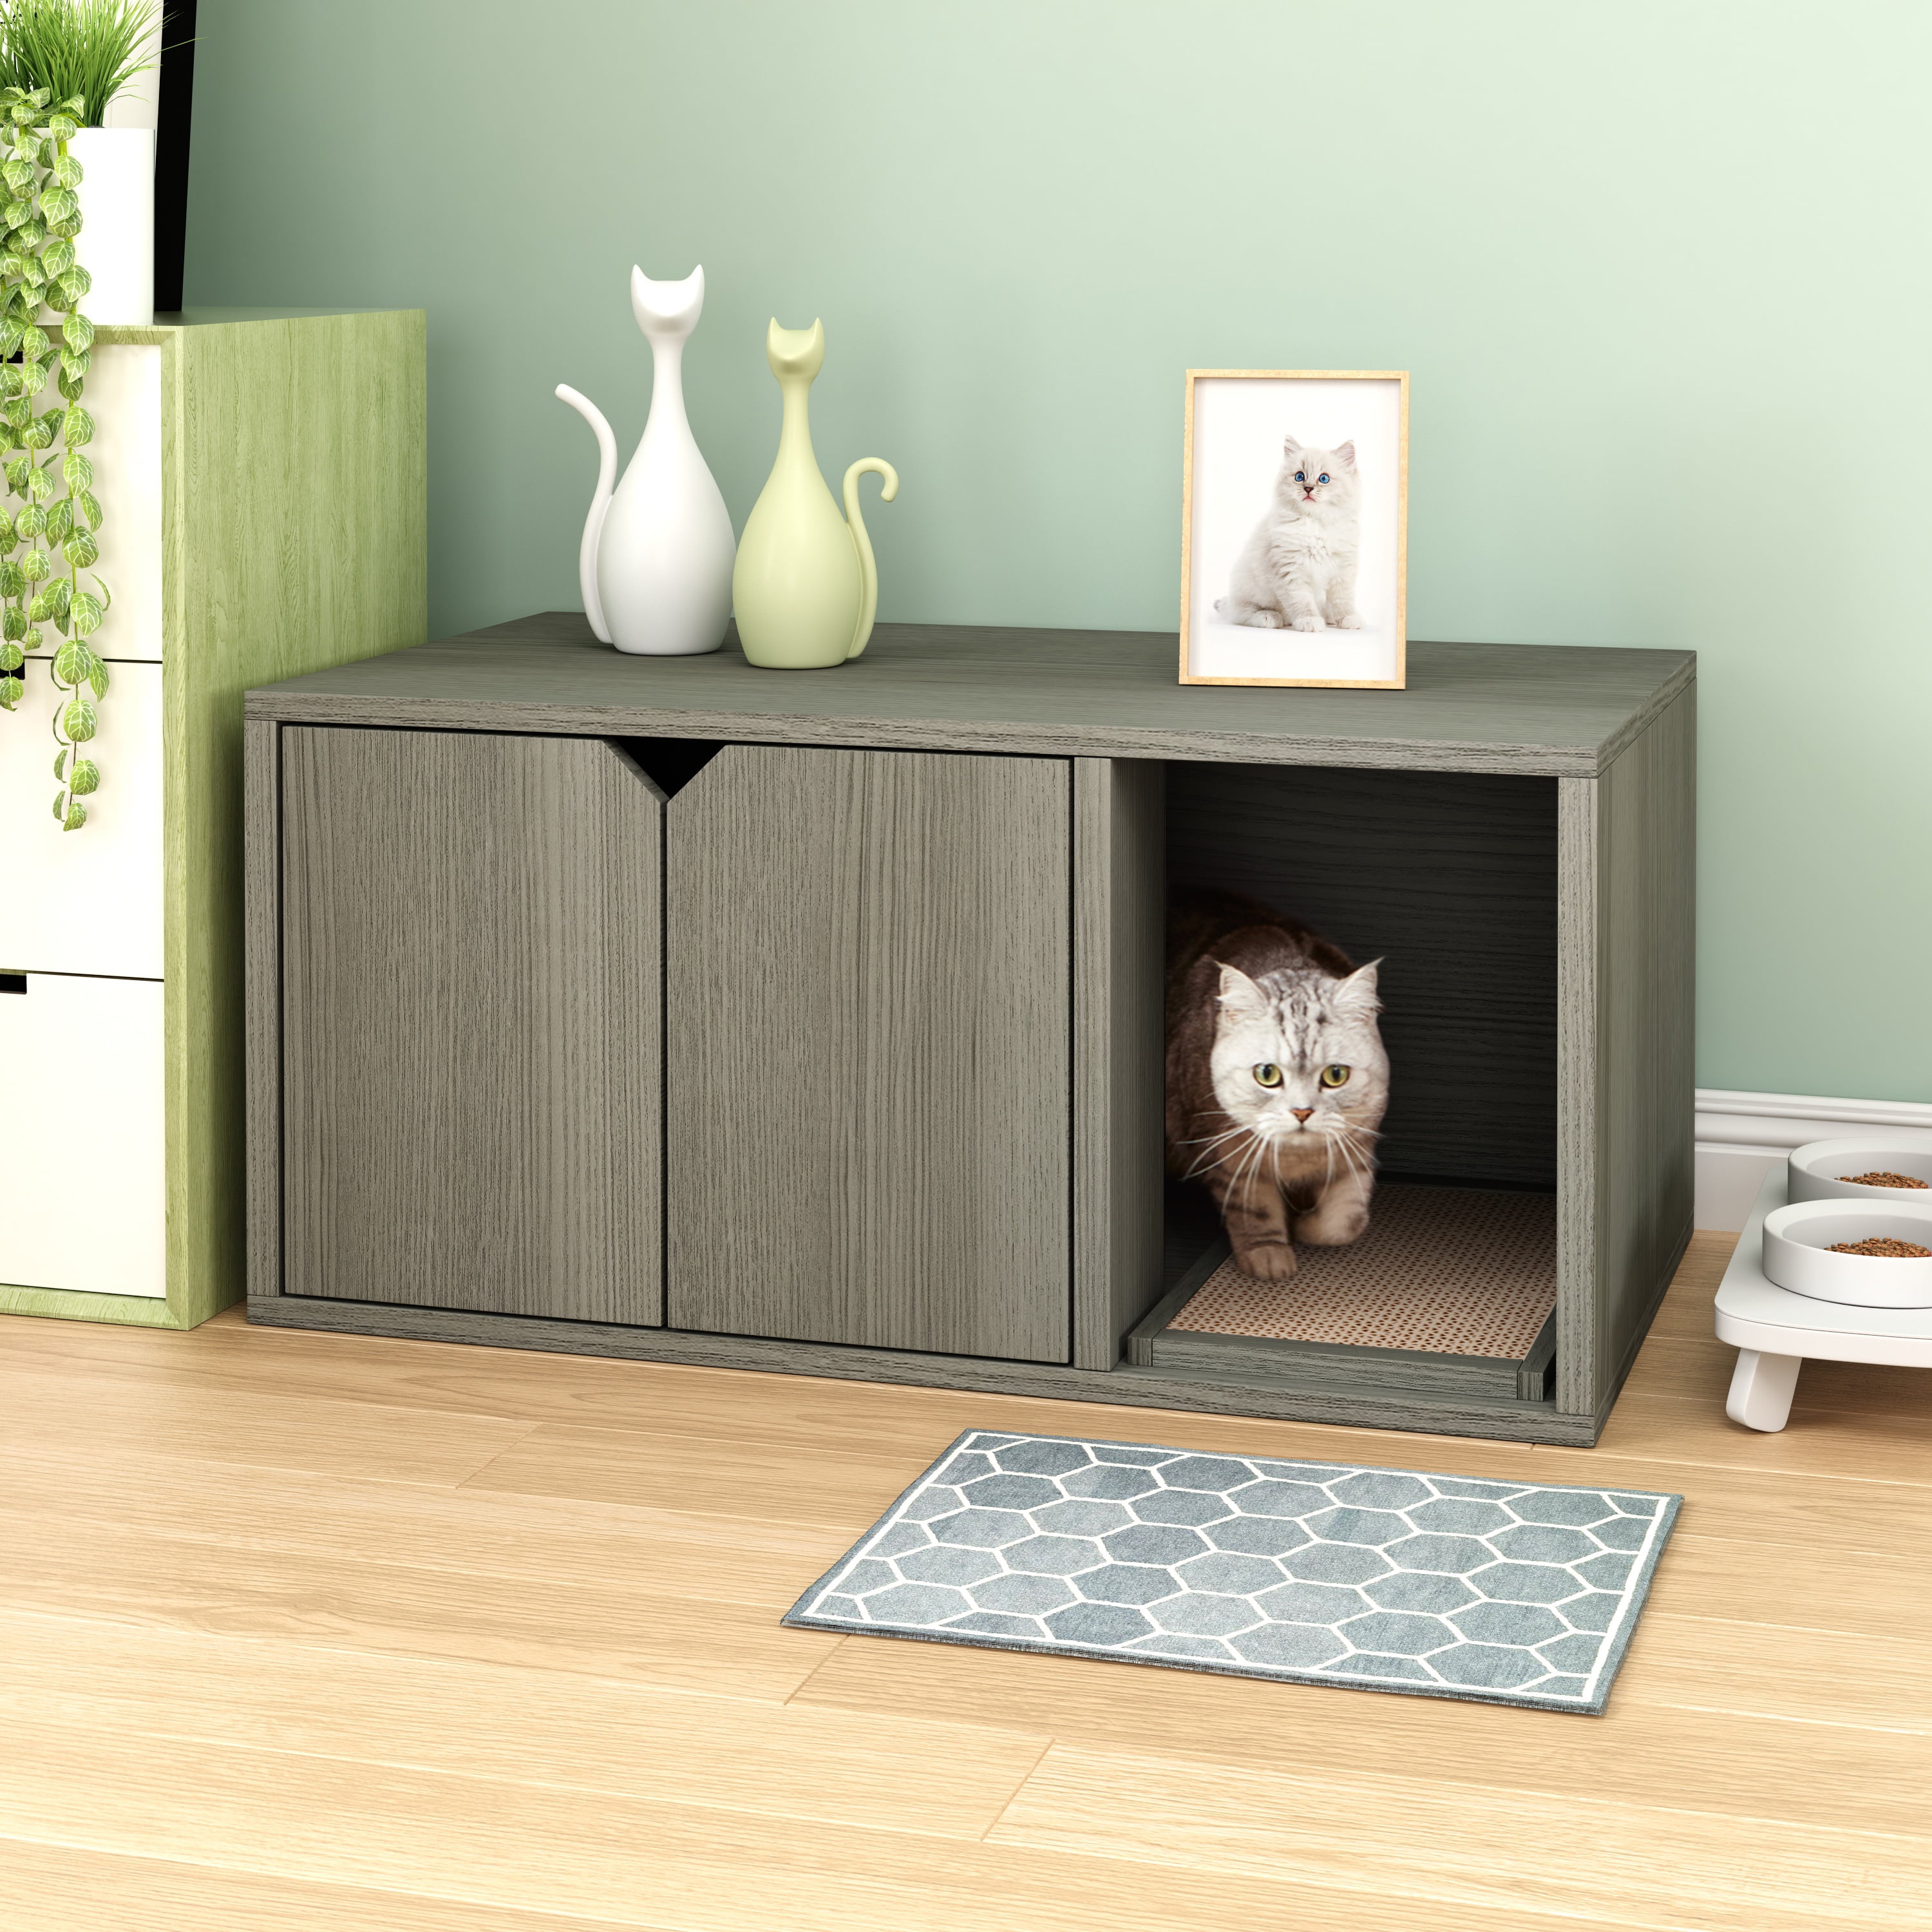 Espresso Way Basics Eco Cat Litter Box Enclosure Modern Cat Furniture Pet Crate with Side Hole Tool-Free Assembly and Uniquely Crafted from Sustainable Non Toxic zBoard Paperboard 